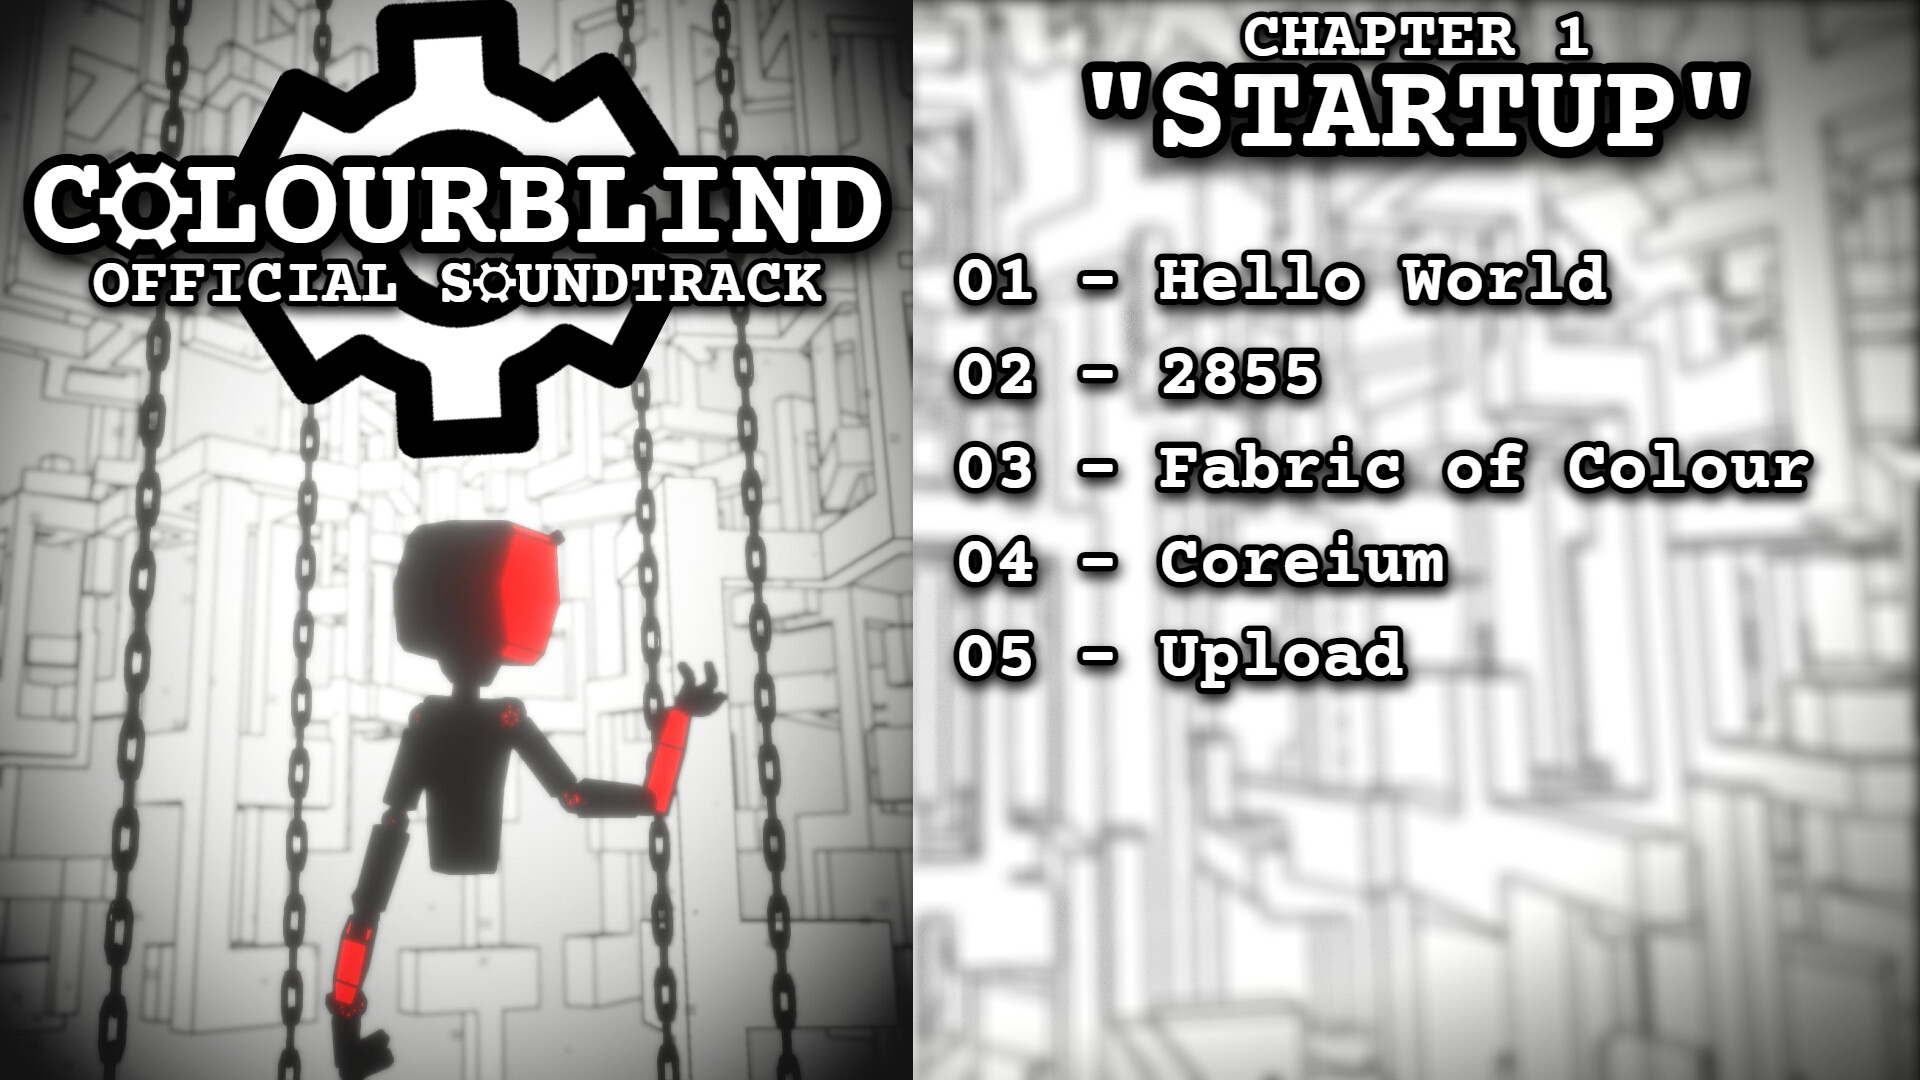 Colourblind Complete Soundtrack Featured Screenshot #1